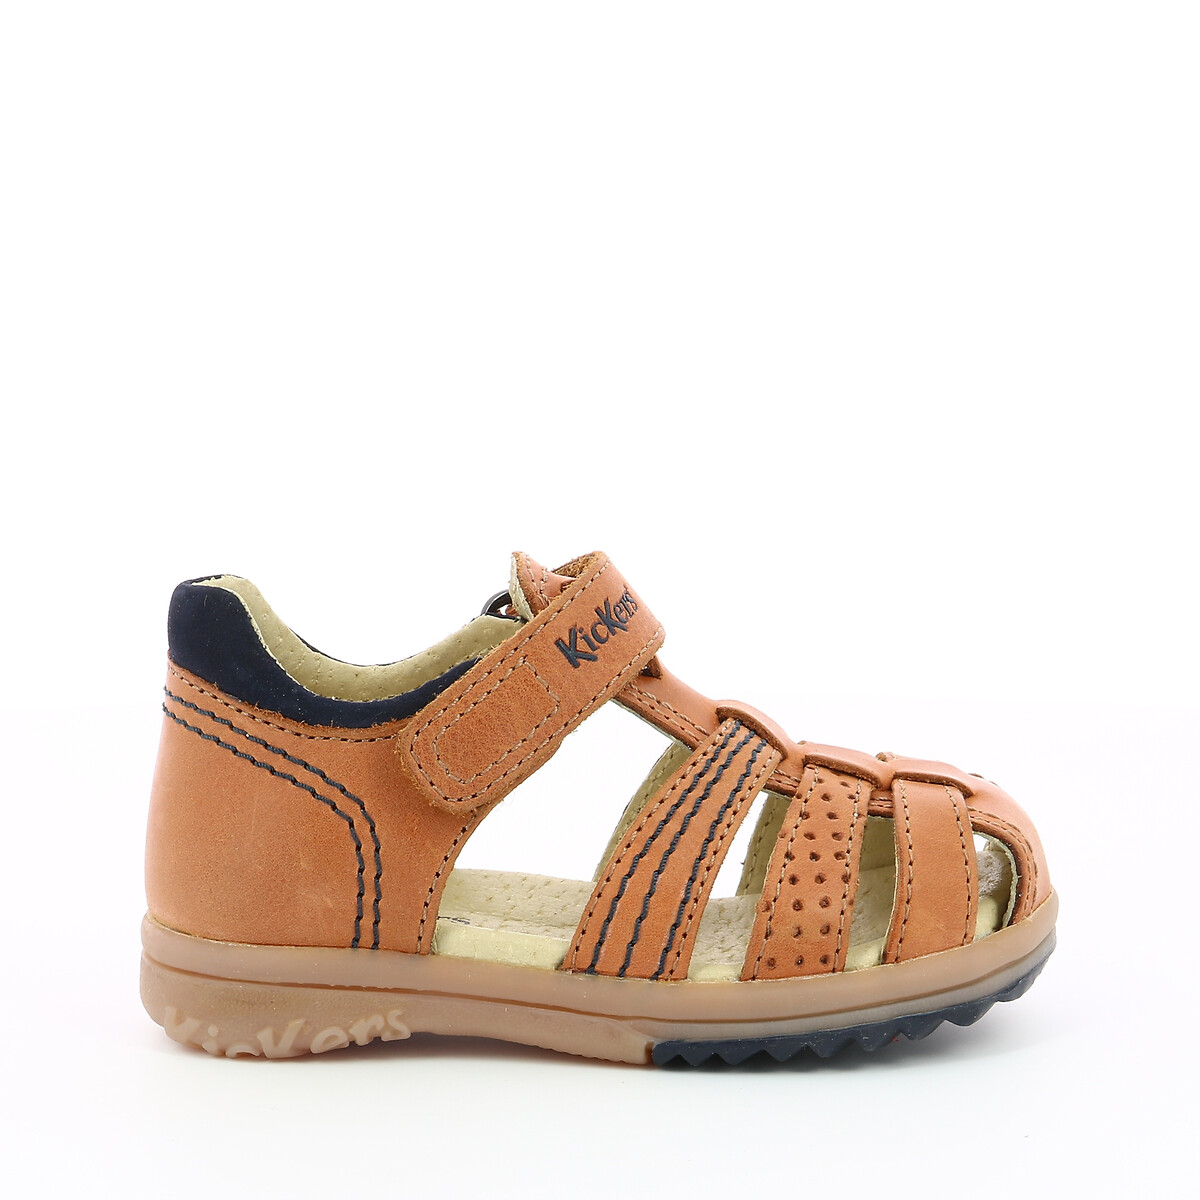 Image of Kids Platiback Leather Sandals with Touch 'n' Close Fastening